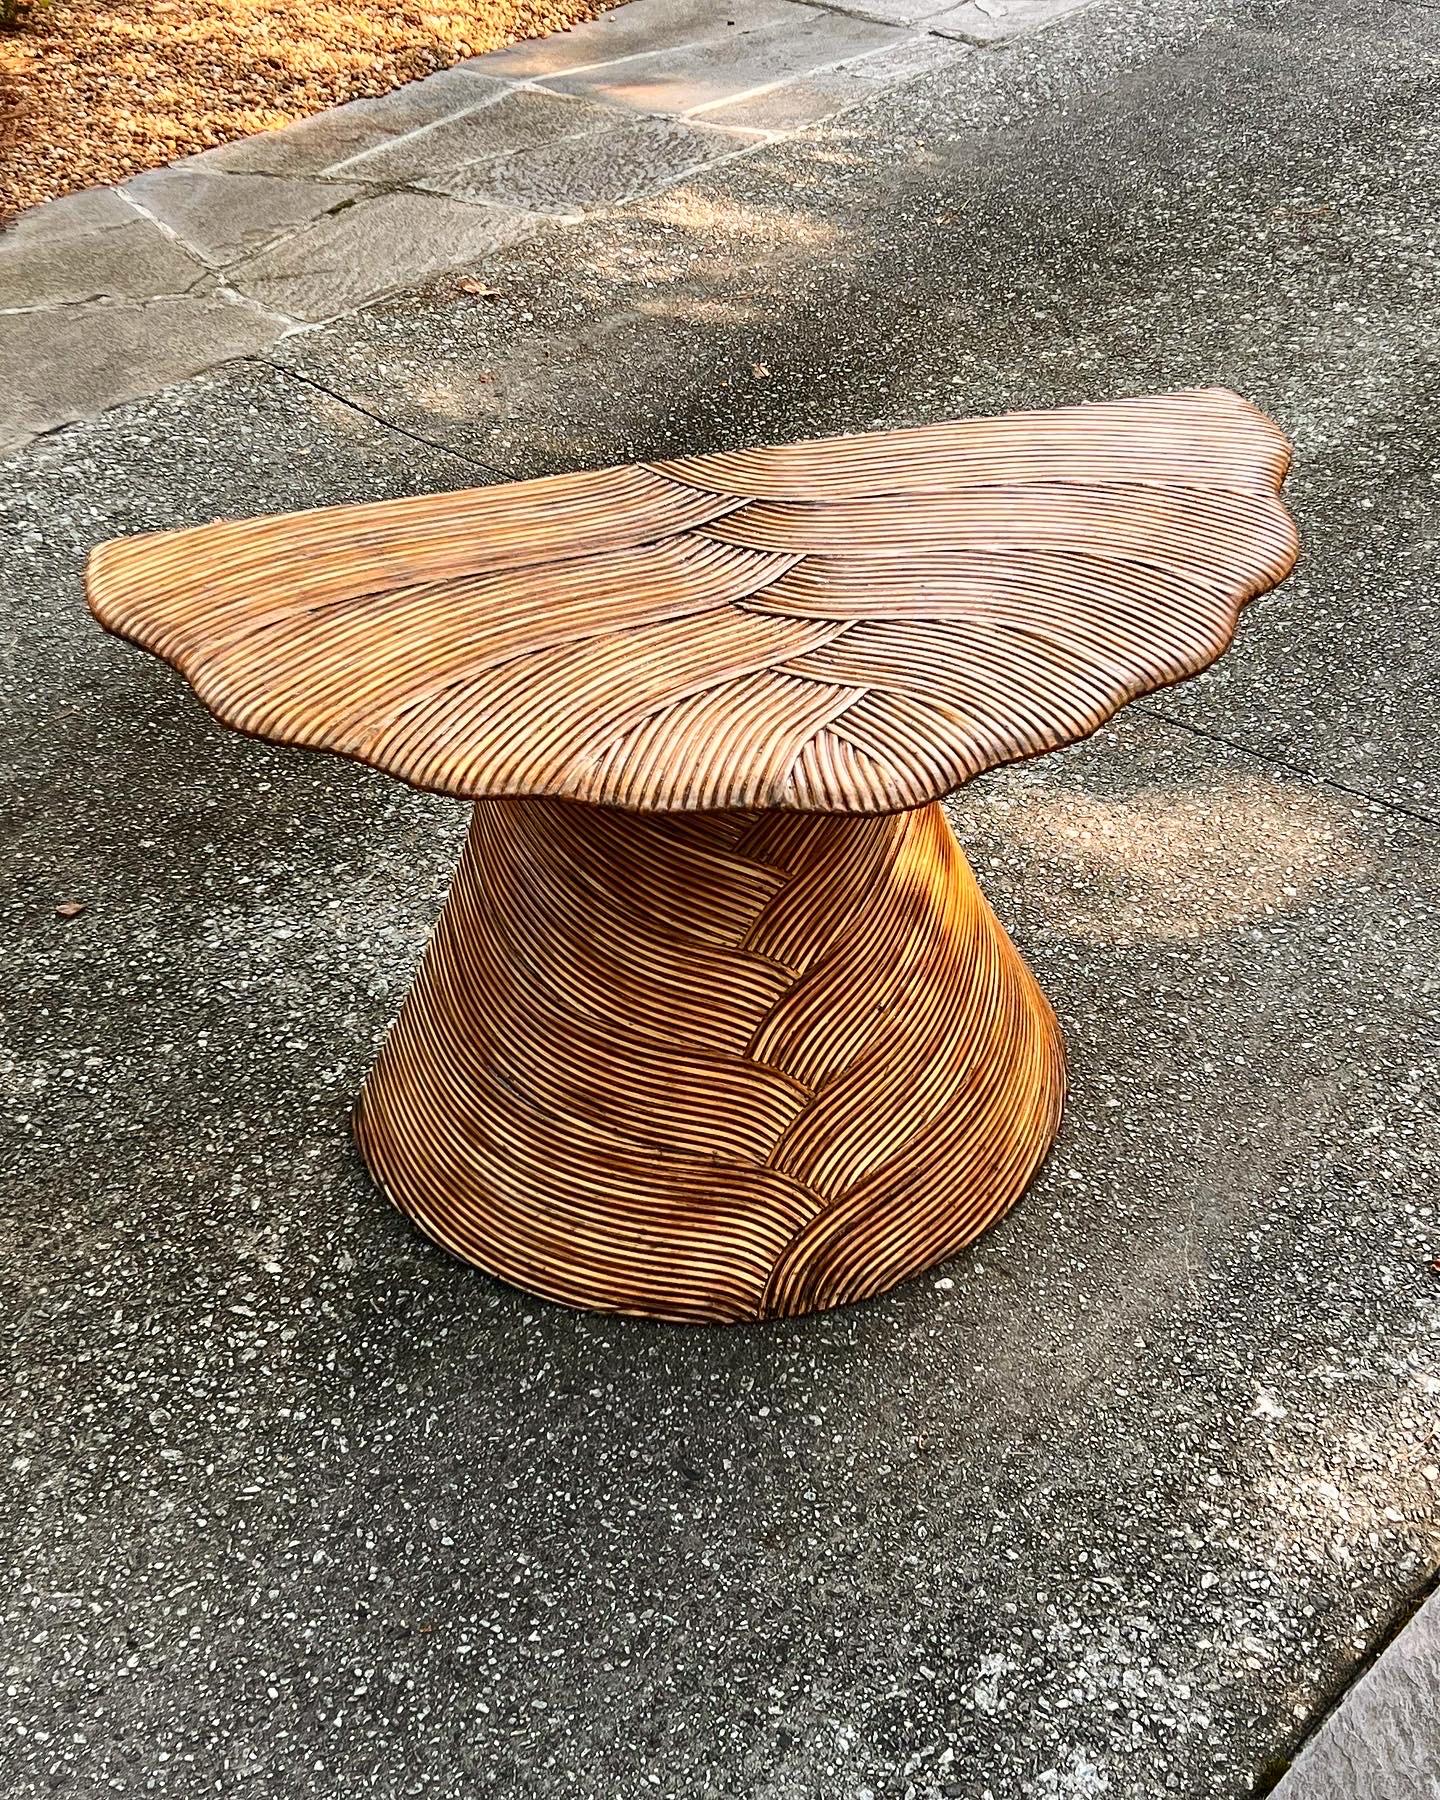 Captivating Art Nouveau Influenced Rattan Palm Frond Console by Betty Cobonpue In Excellent Condition For Sale In Atlanta, GA